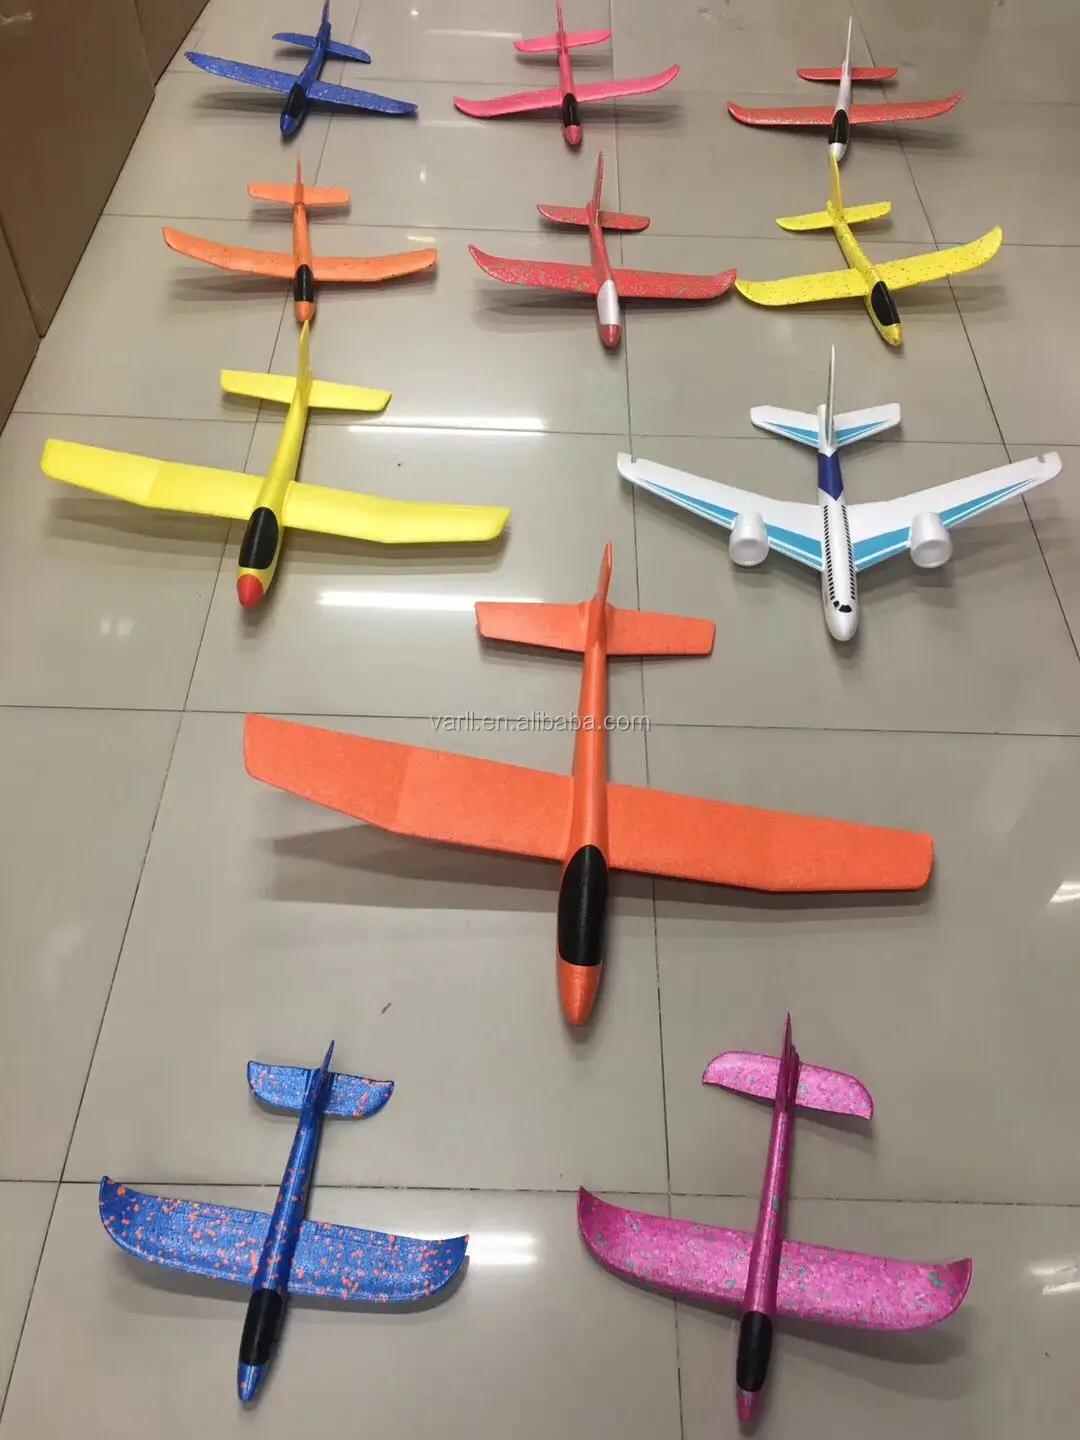 Details about   4pc Hand Launch Throwing Glider Aircraft Foam Airplane Plane Model Kids Toy Gift 